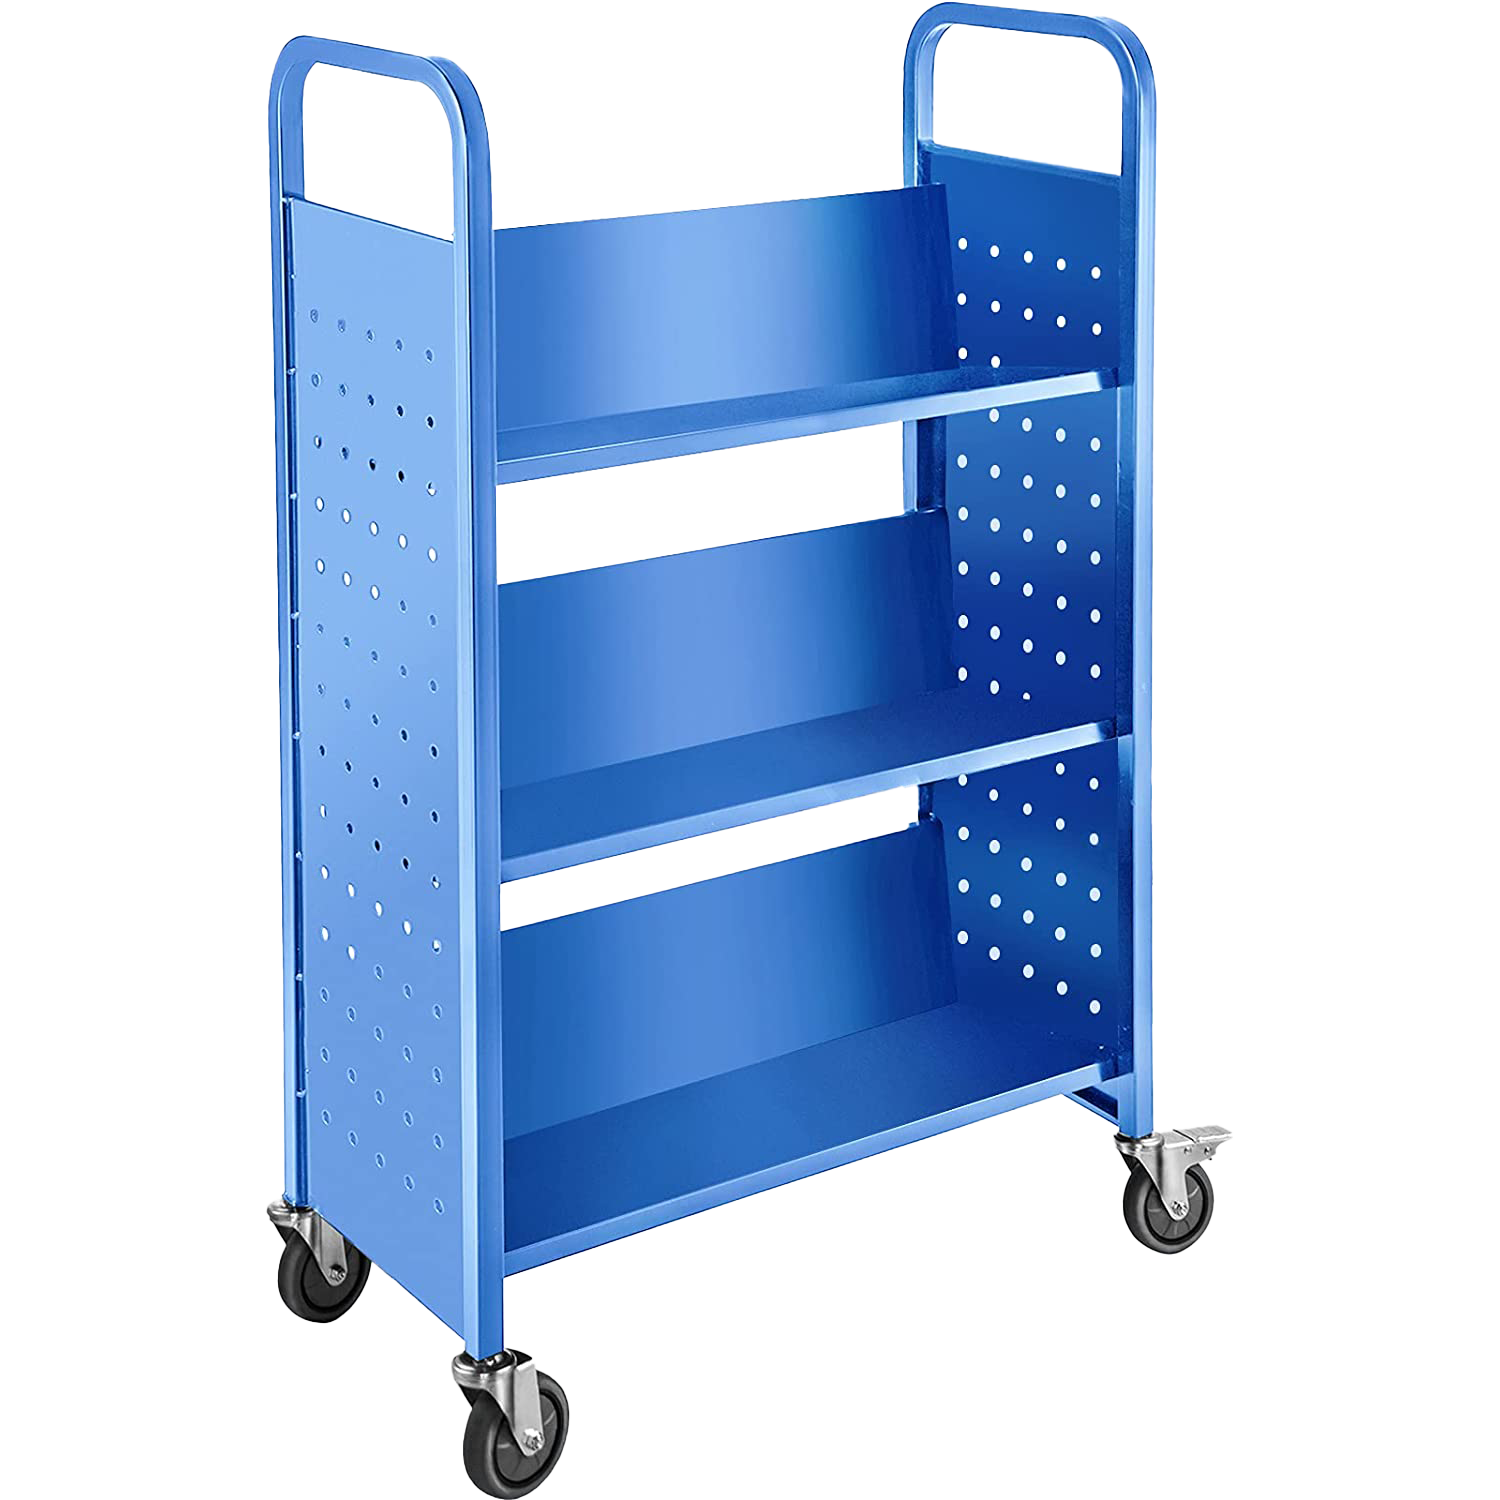 The Best Storage Carts on Amazon Work as Nightstands, Bars, and Tiny Libraries